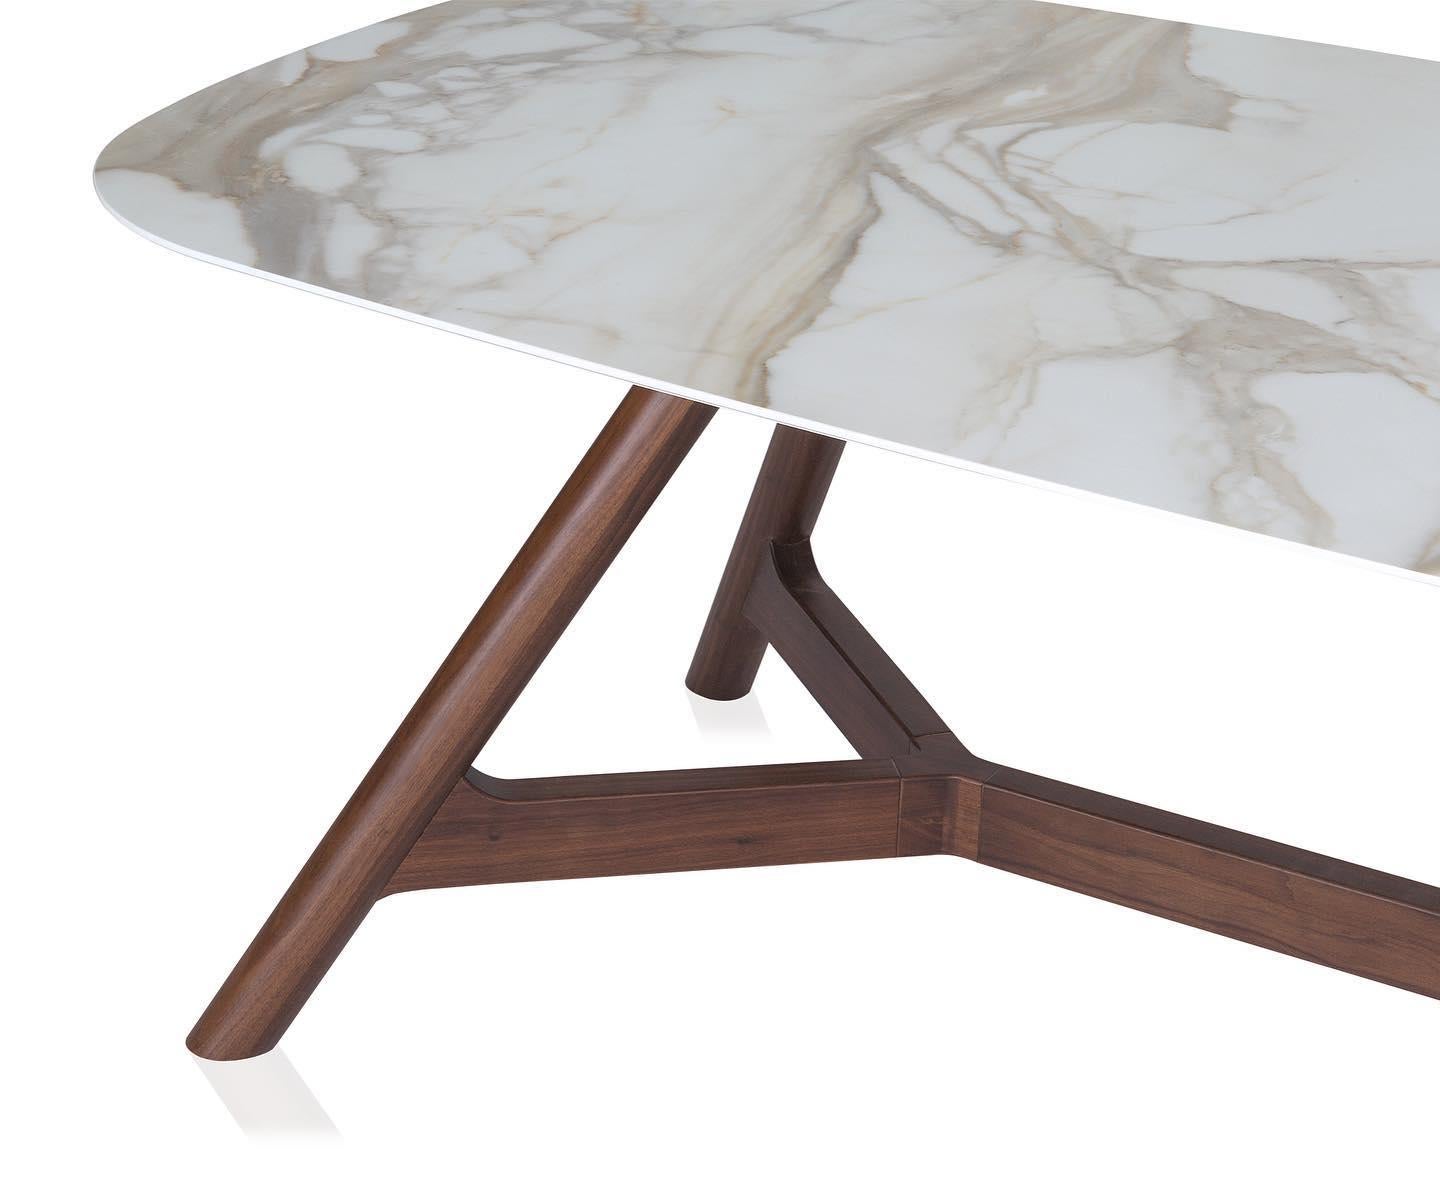 Contemporary Walnut Dining Table Made to Order with Shaped Marble Top For Sale